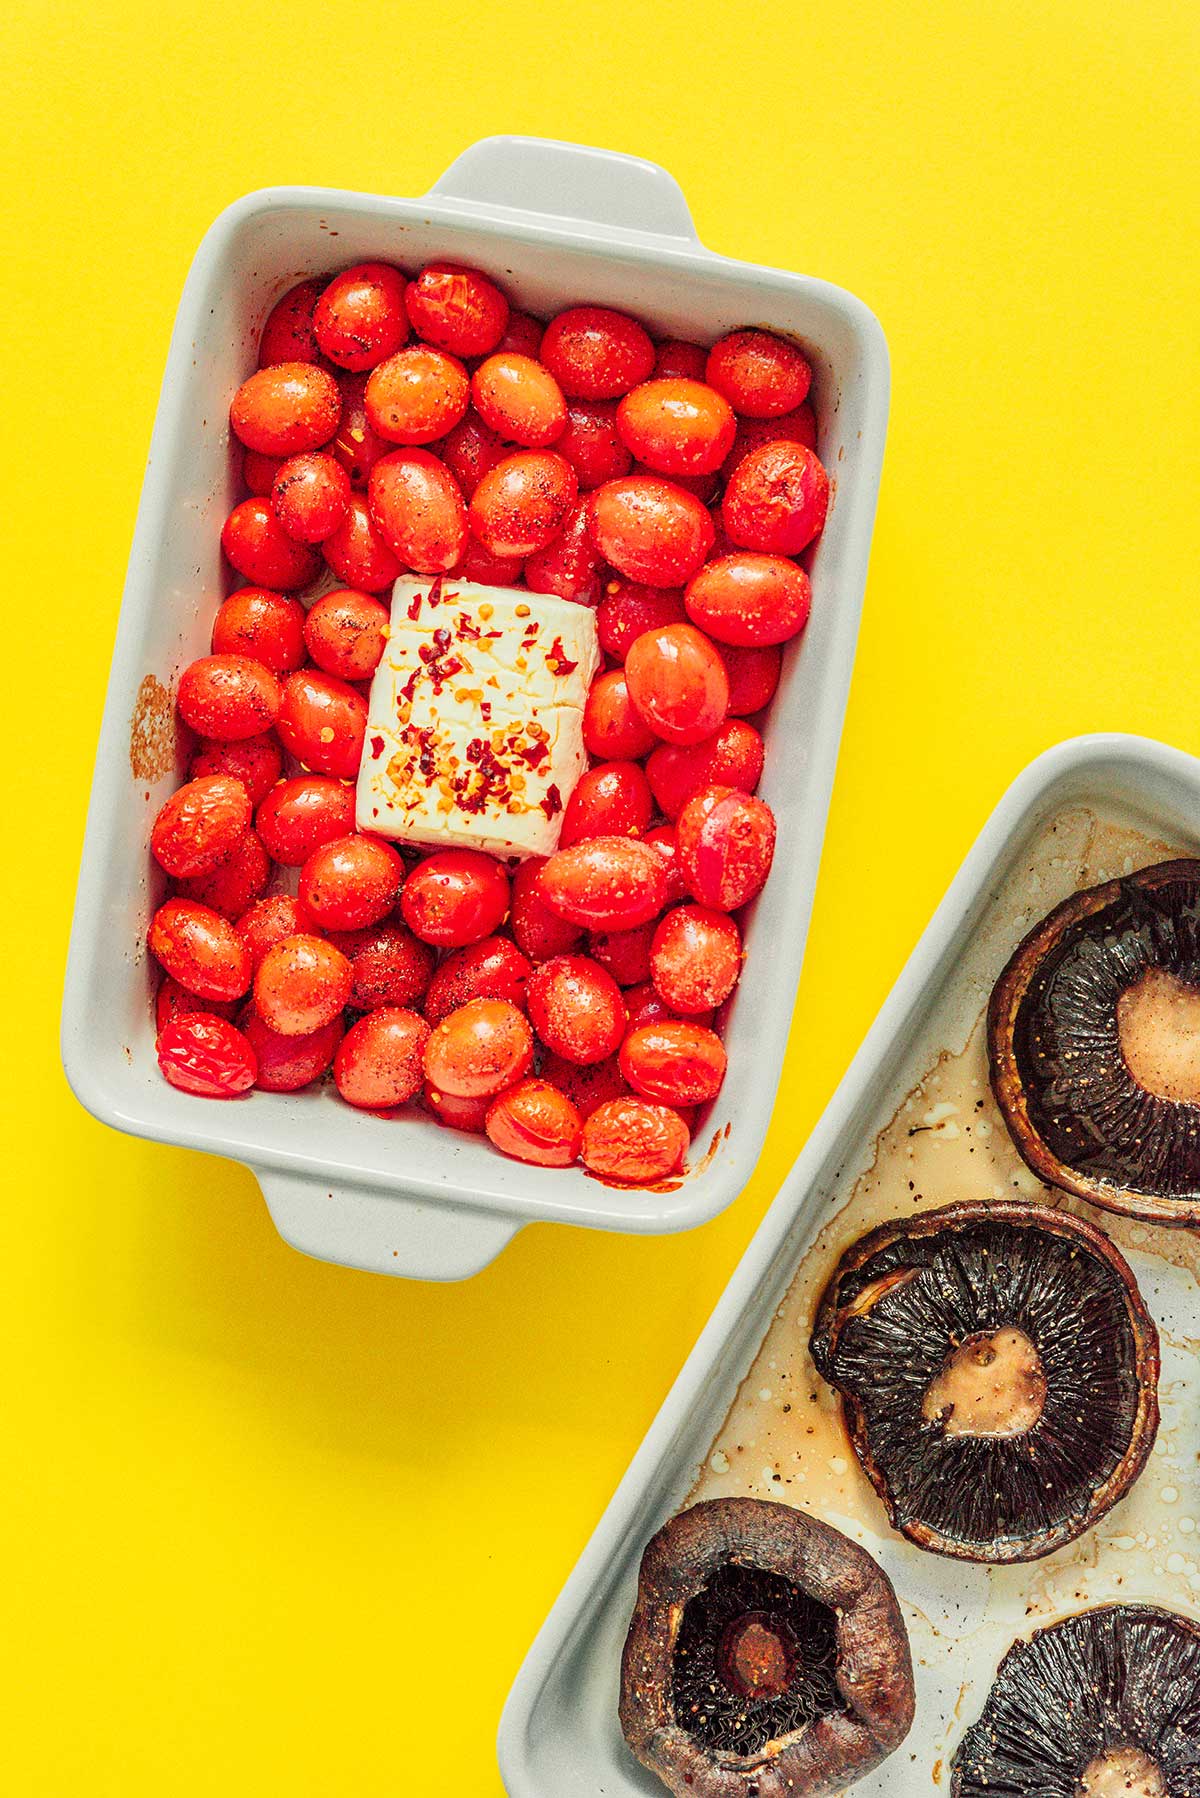 A casserole dish filled with baked cherry tomatoes and goat cheese beside a baking tray filled with baked portobello mushrooms